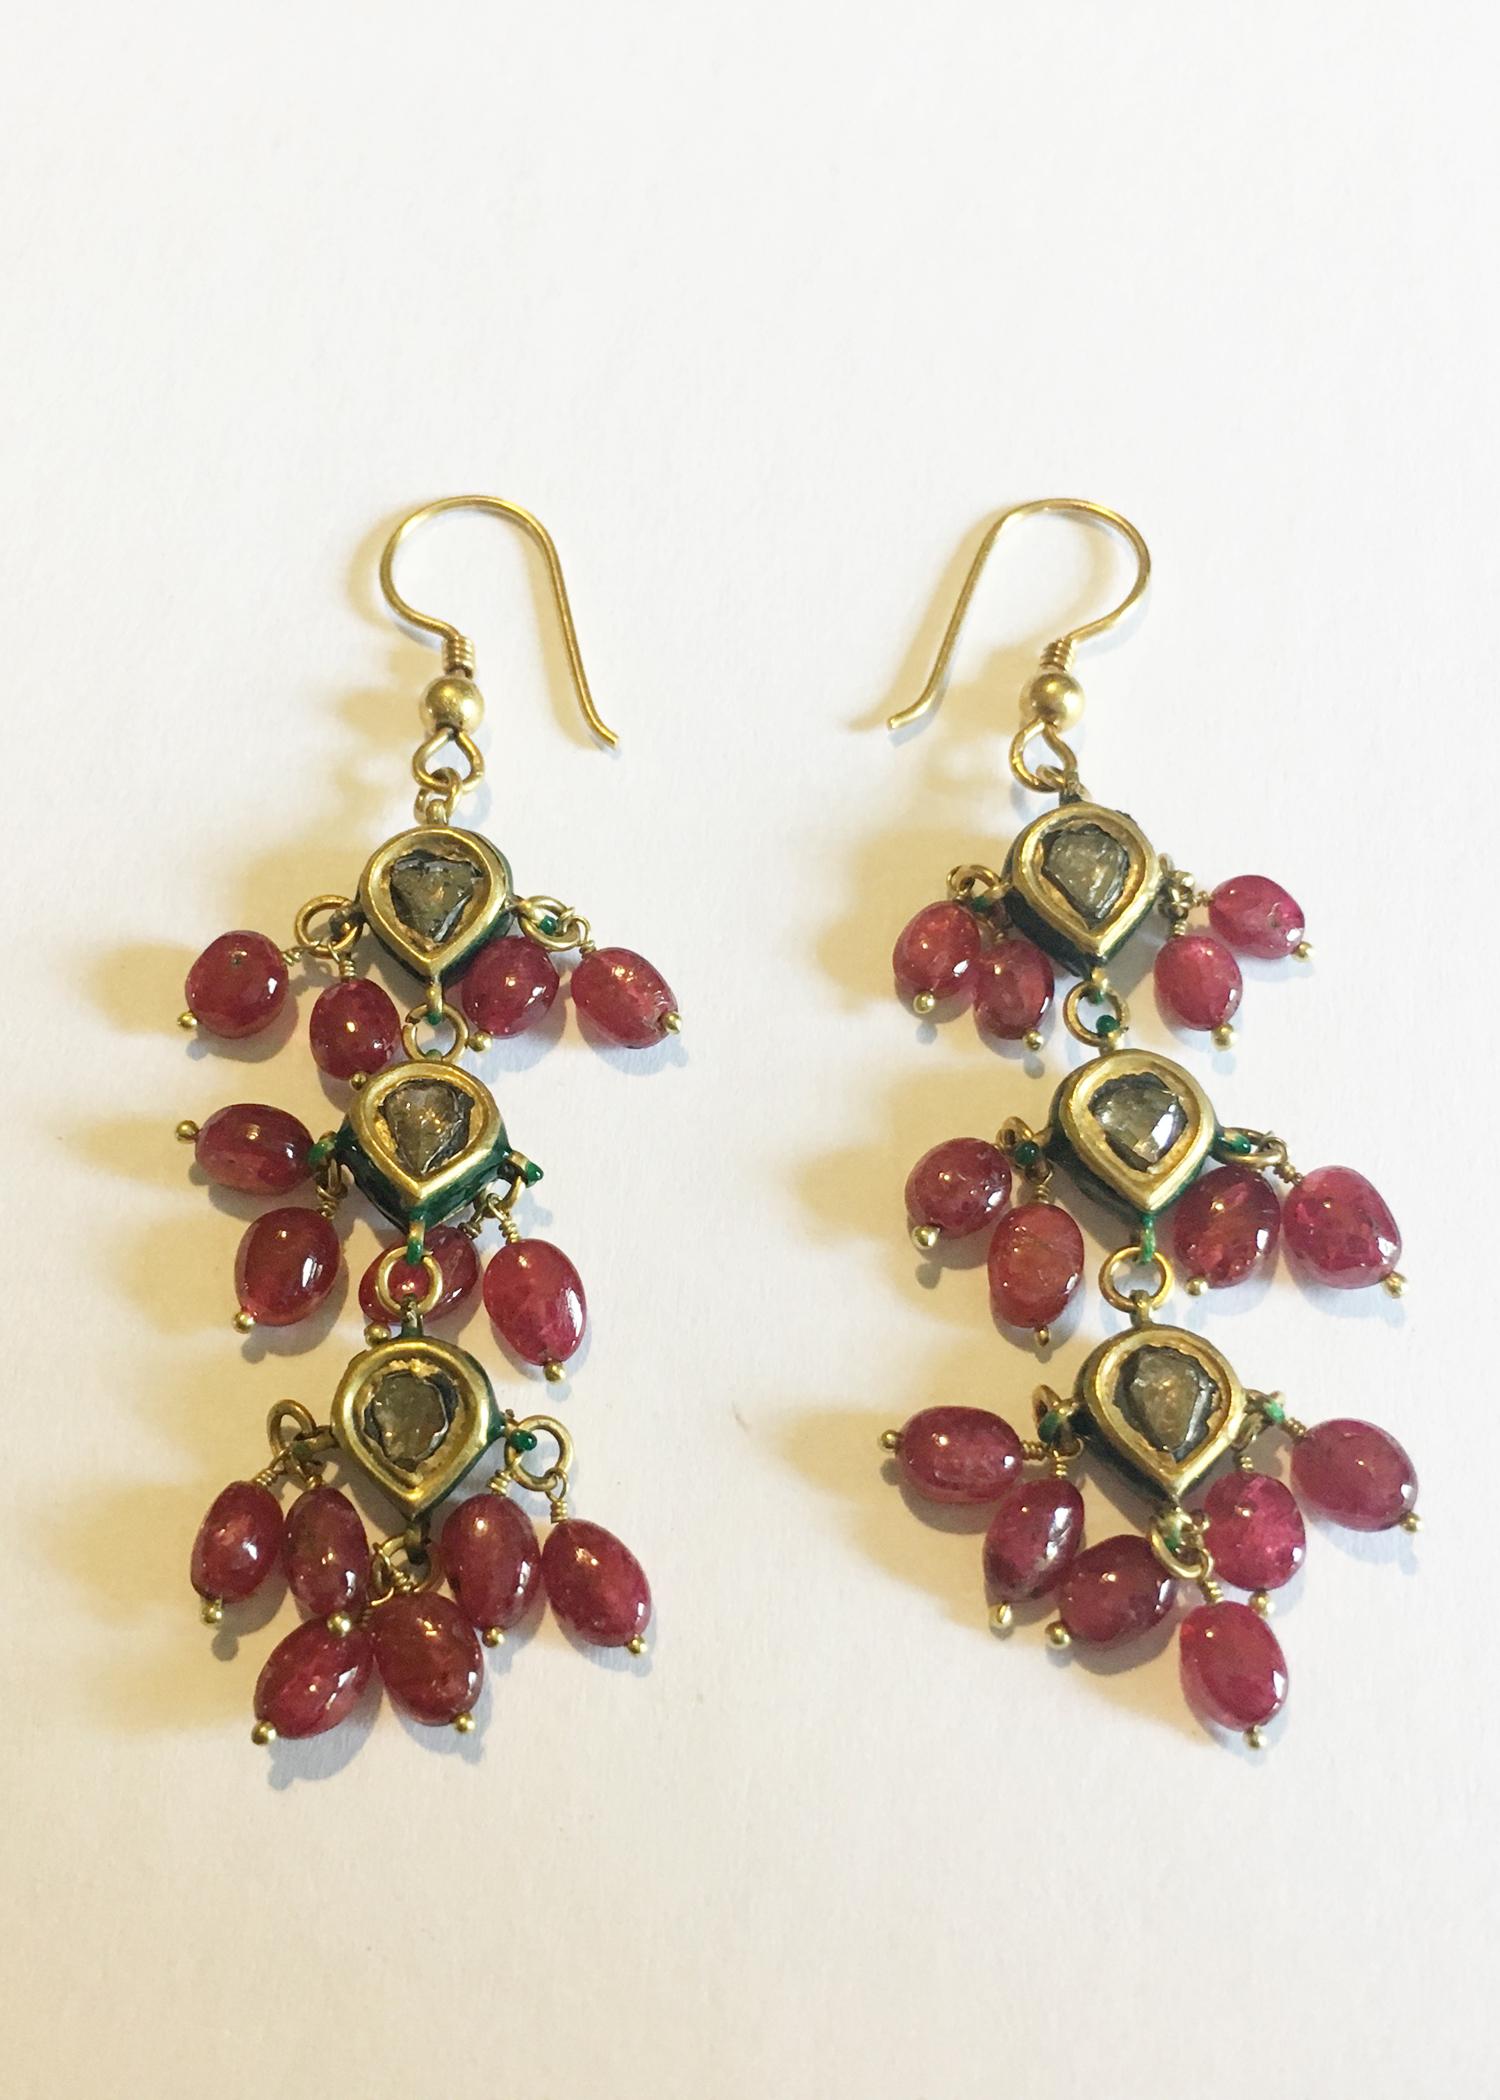 A magnificent pair of Kundan chandelier earrings with polished rubies and flat-cut, foil-backed diamonds set in 18 karat gold with green enamel. These Rajasthani earrings were handmade using the traditional Kundan process, which involves setting